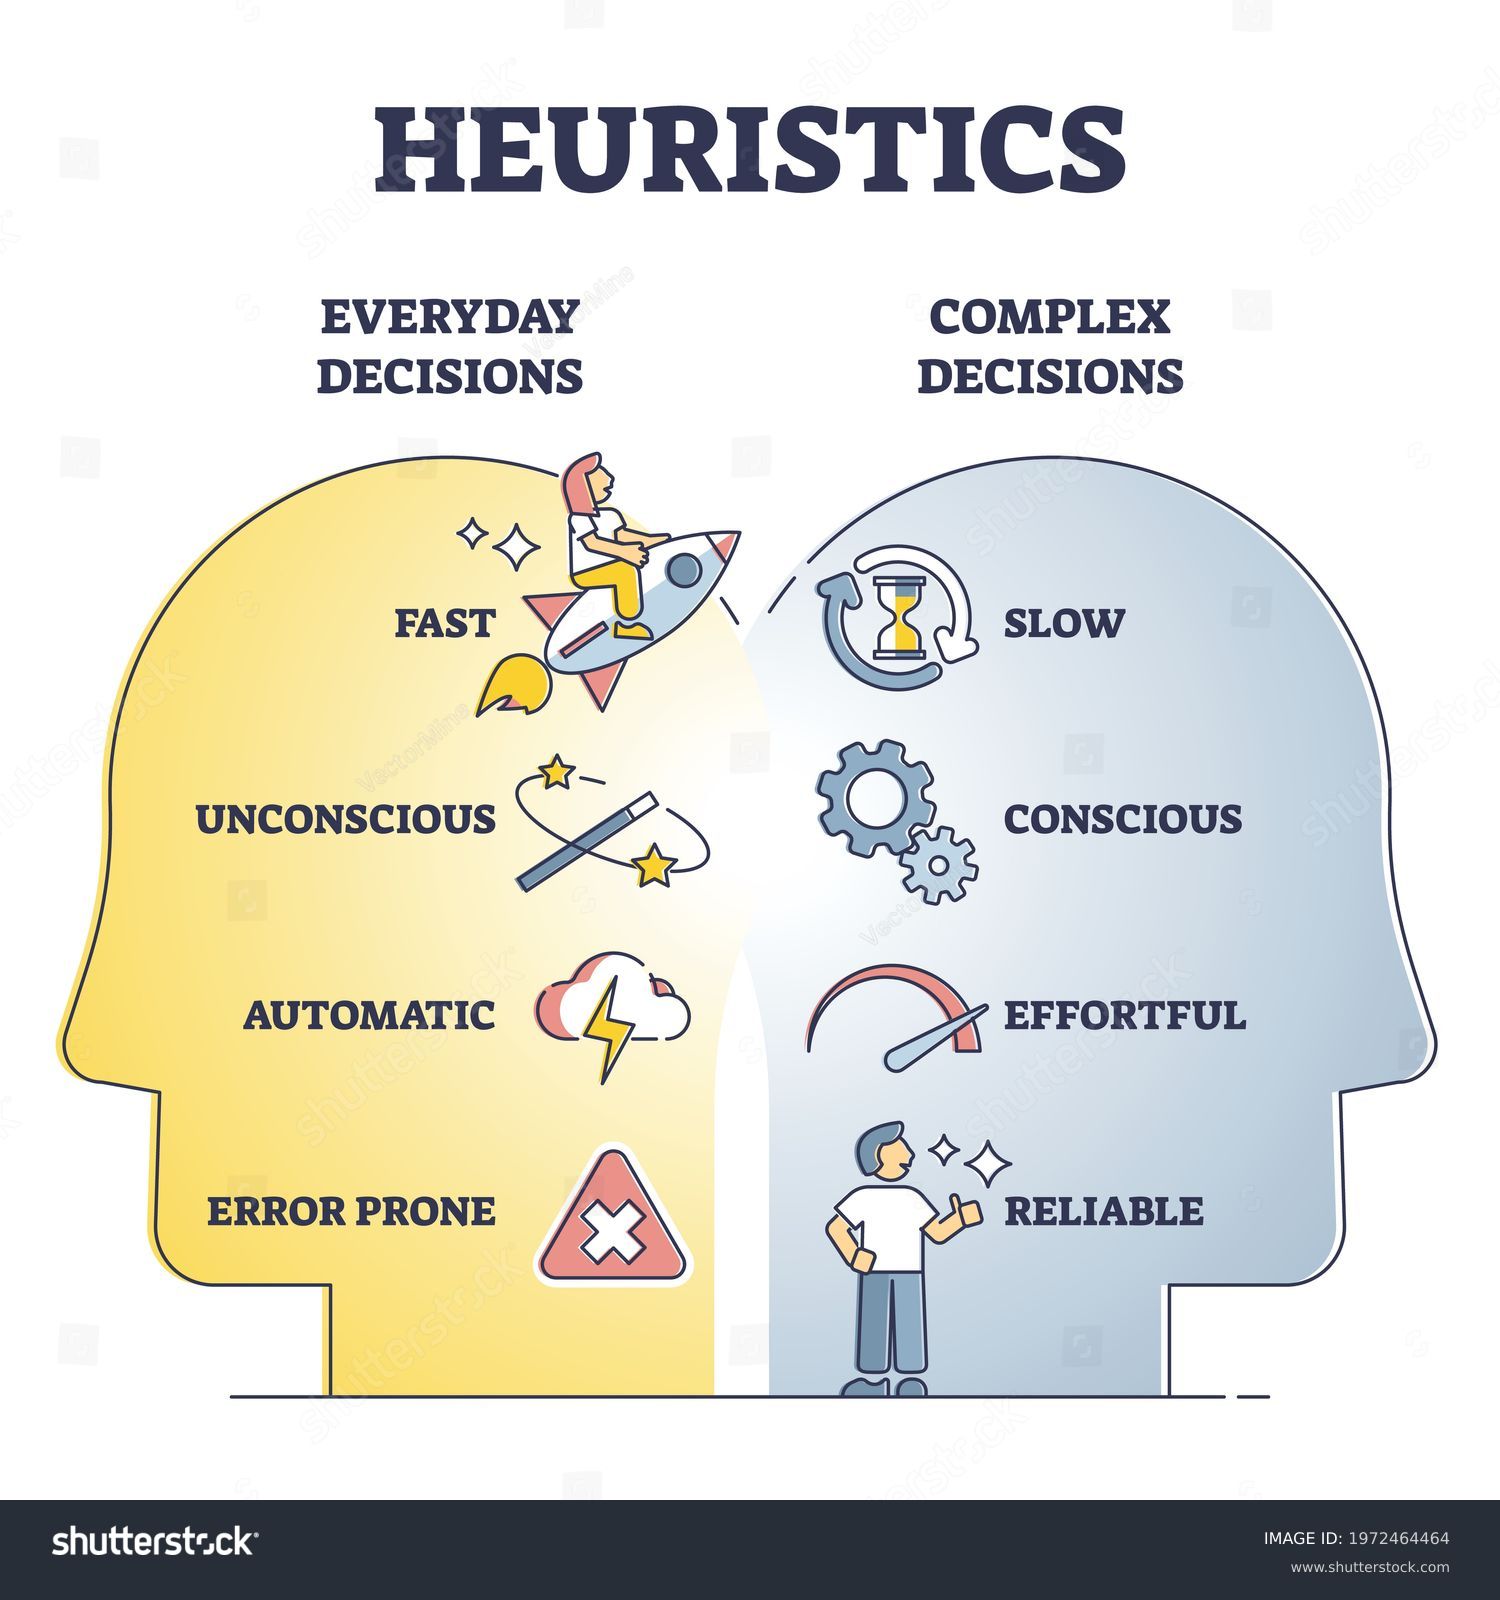 stock-vector-heuristics-decisions-and-mental-thinking-shortcut-approach-outline-diagram-everyday-vs-complex-1972464464.jpg